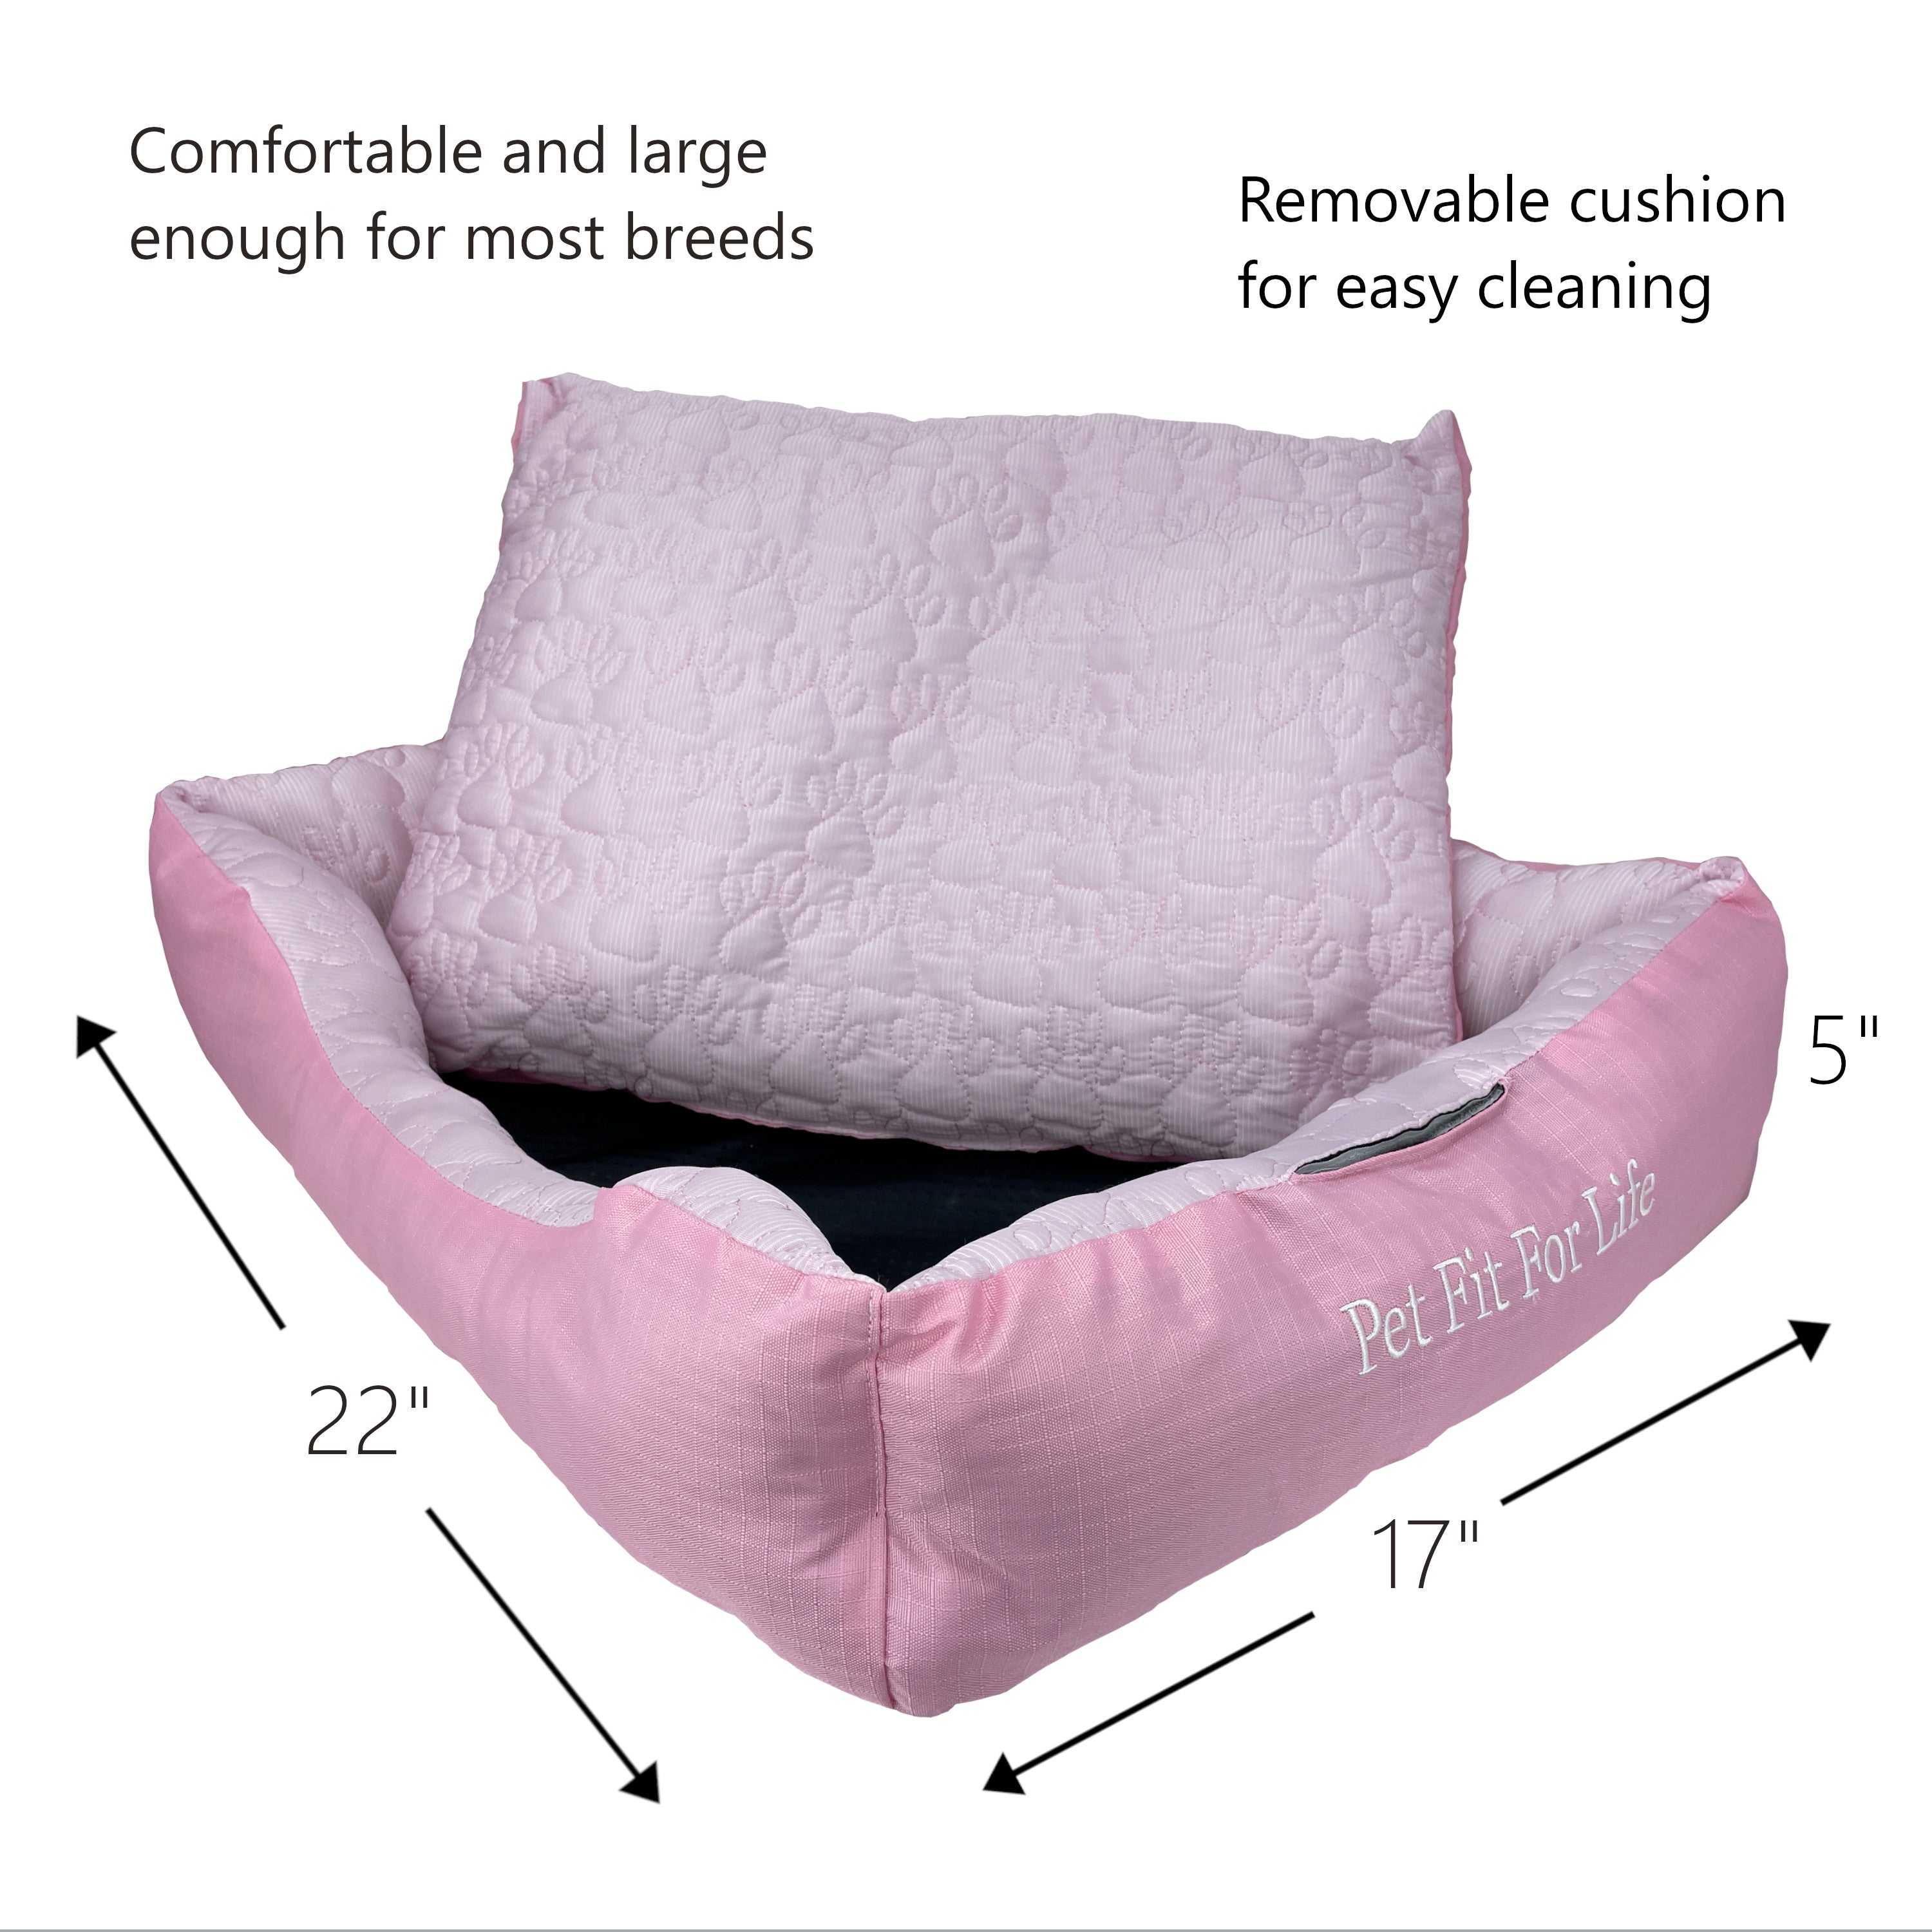 Comfort Bed with Heartbeat Simulator for Dogs or Cats - Pink